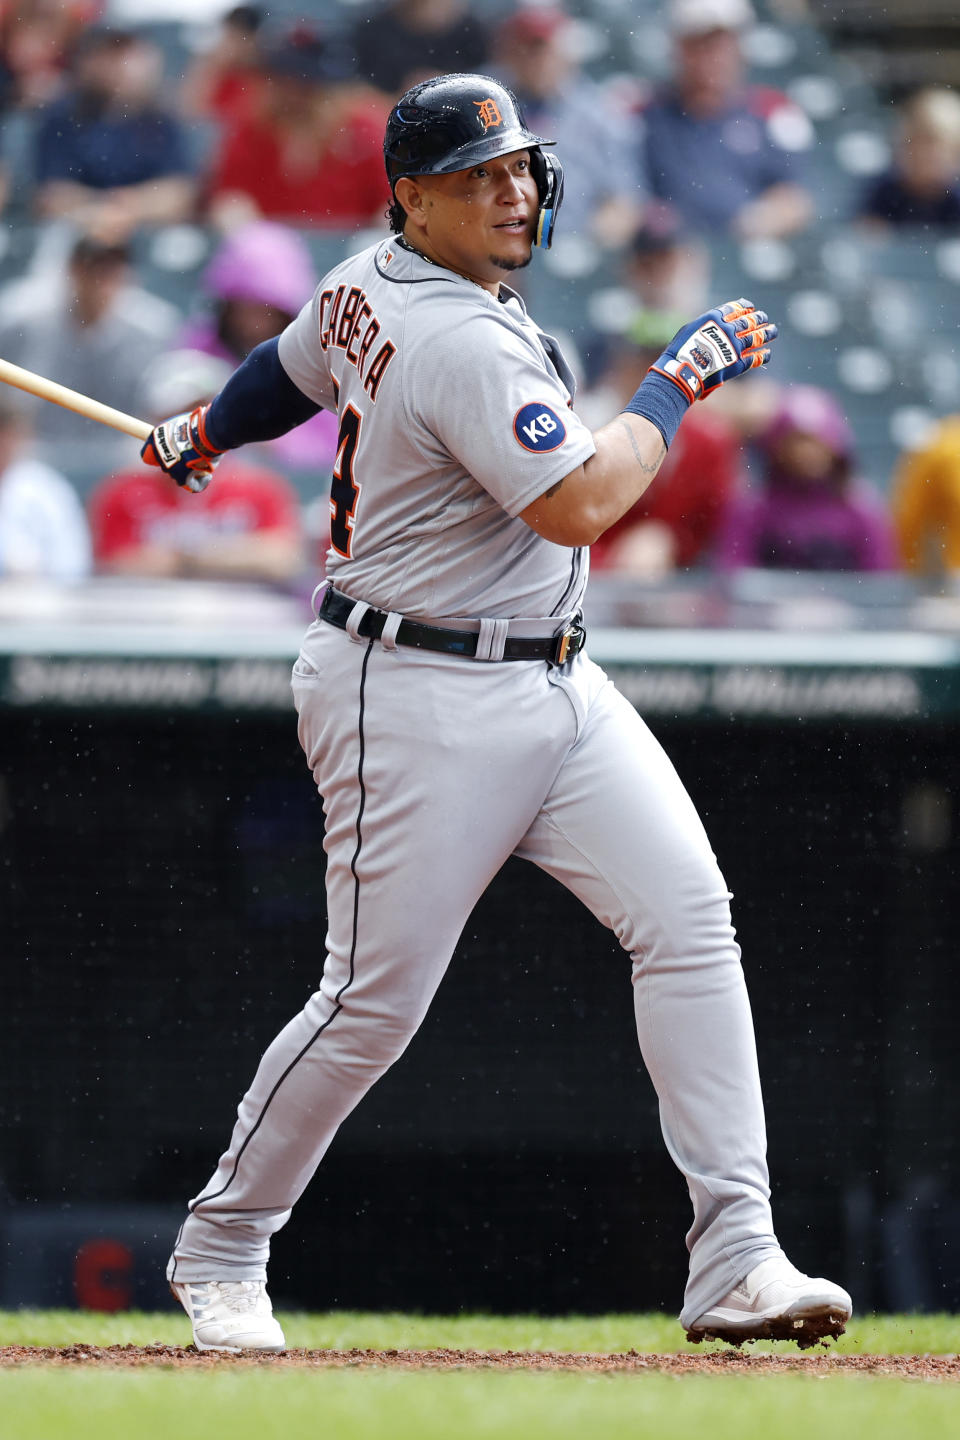 Detroit Tigers designated hitter Miguel Cabrera watches his single off Cleveland Guardians starting pitcher Cal Quantrill during the third inning of a baseball game Saturday, July 16, 2022, in Cleveland. (AP Photo/Ron Schwane)